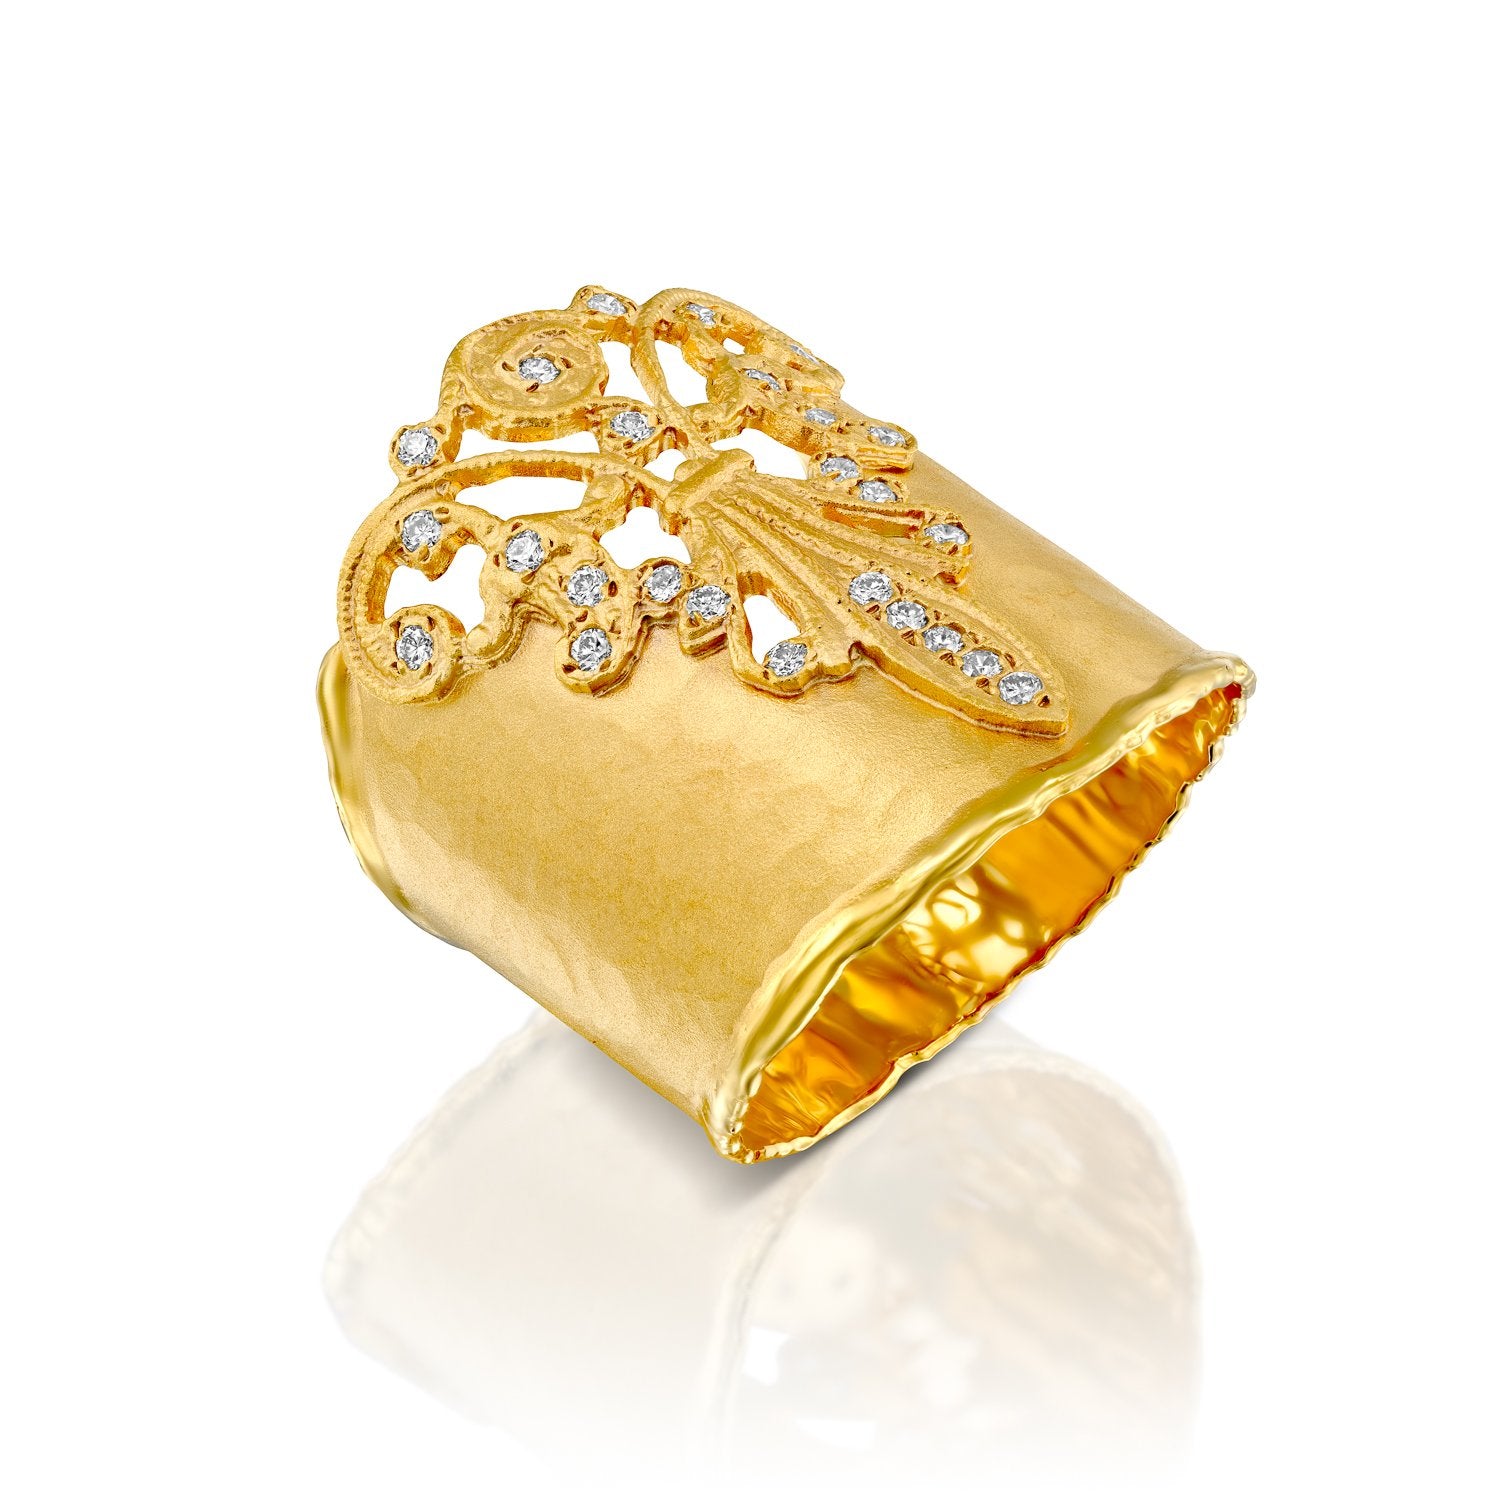 4116 - 14kt yellow handmade filigree gold ring with shiny torched edges, .25cttw of round brilliant cut white diamonds.